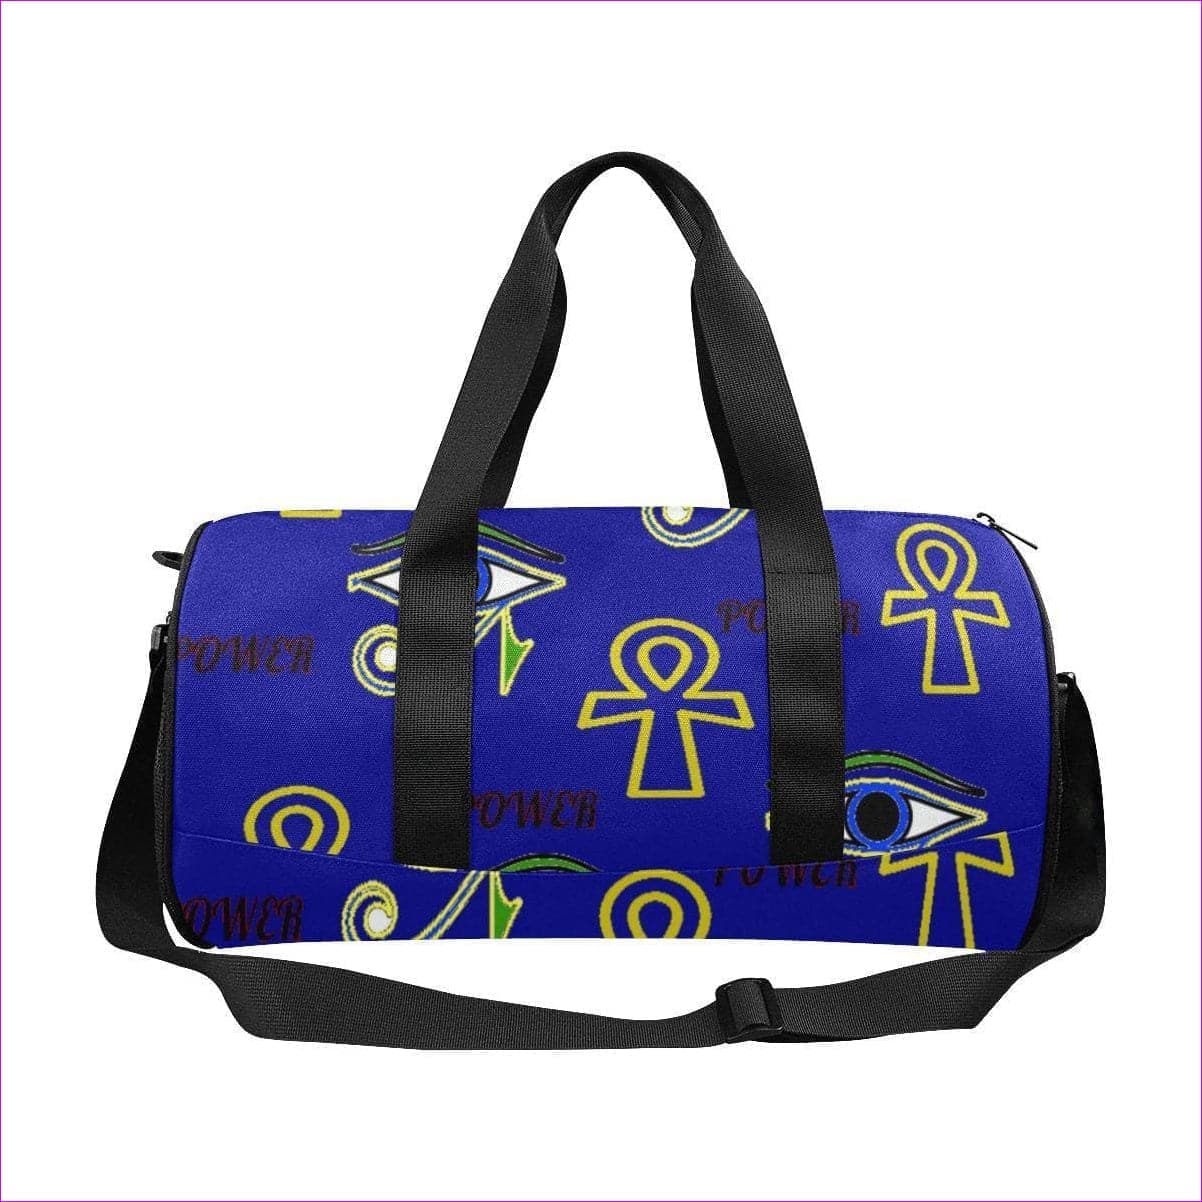 One Size Power - Blue Travel Duffel Bags (Model 1679) - Power Clothing Travel Duffel Bag - Travel Bags at TFC&H Co.